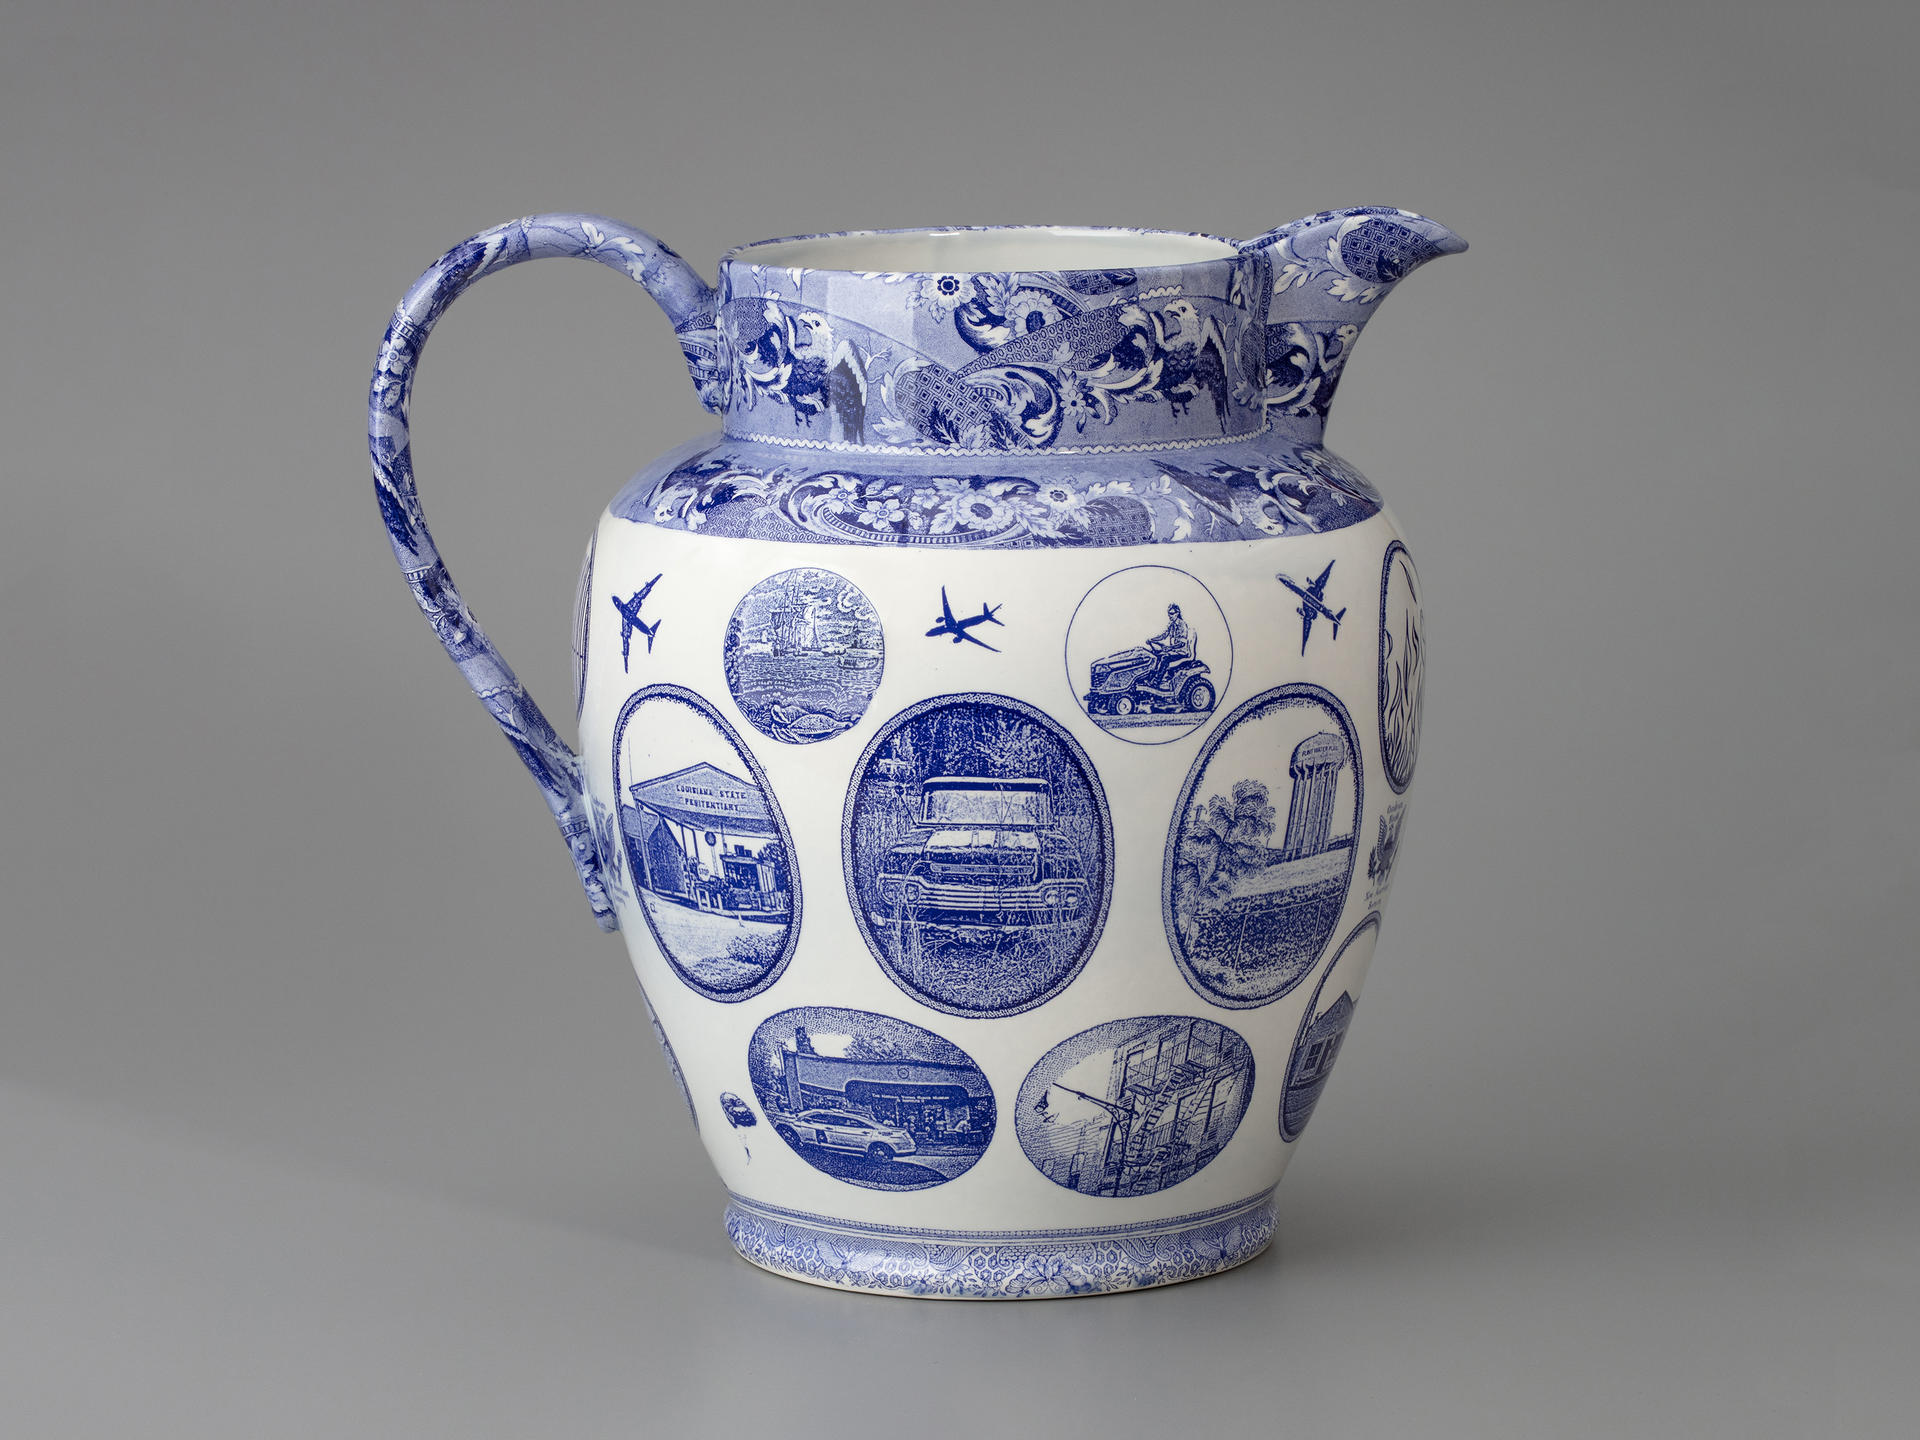 blue and white transferware jug with many vignettes